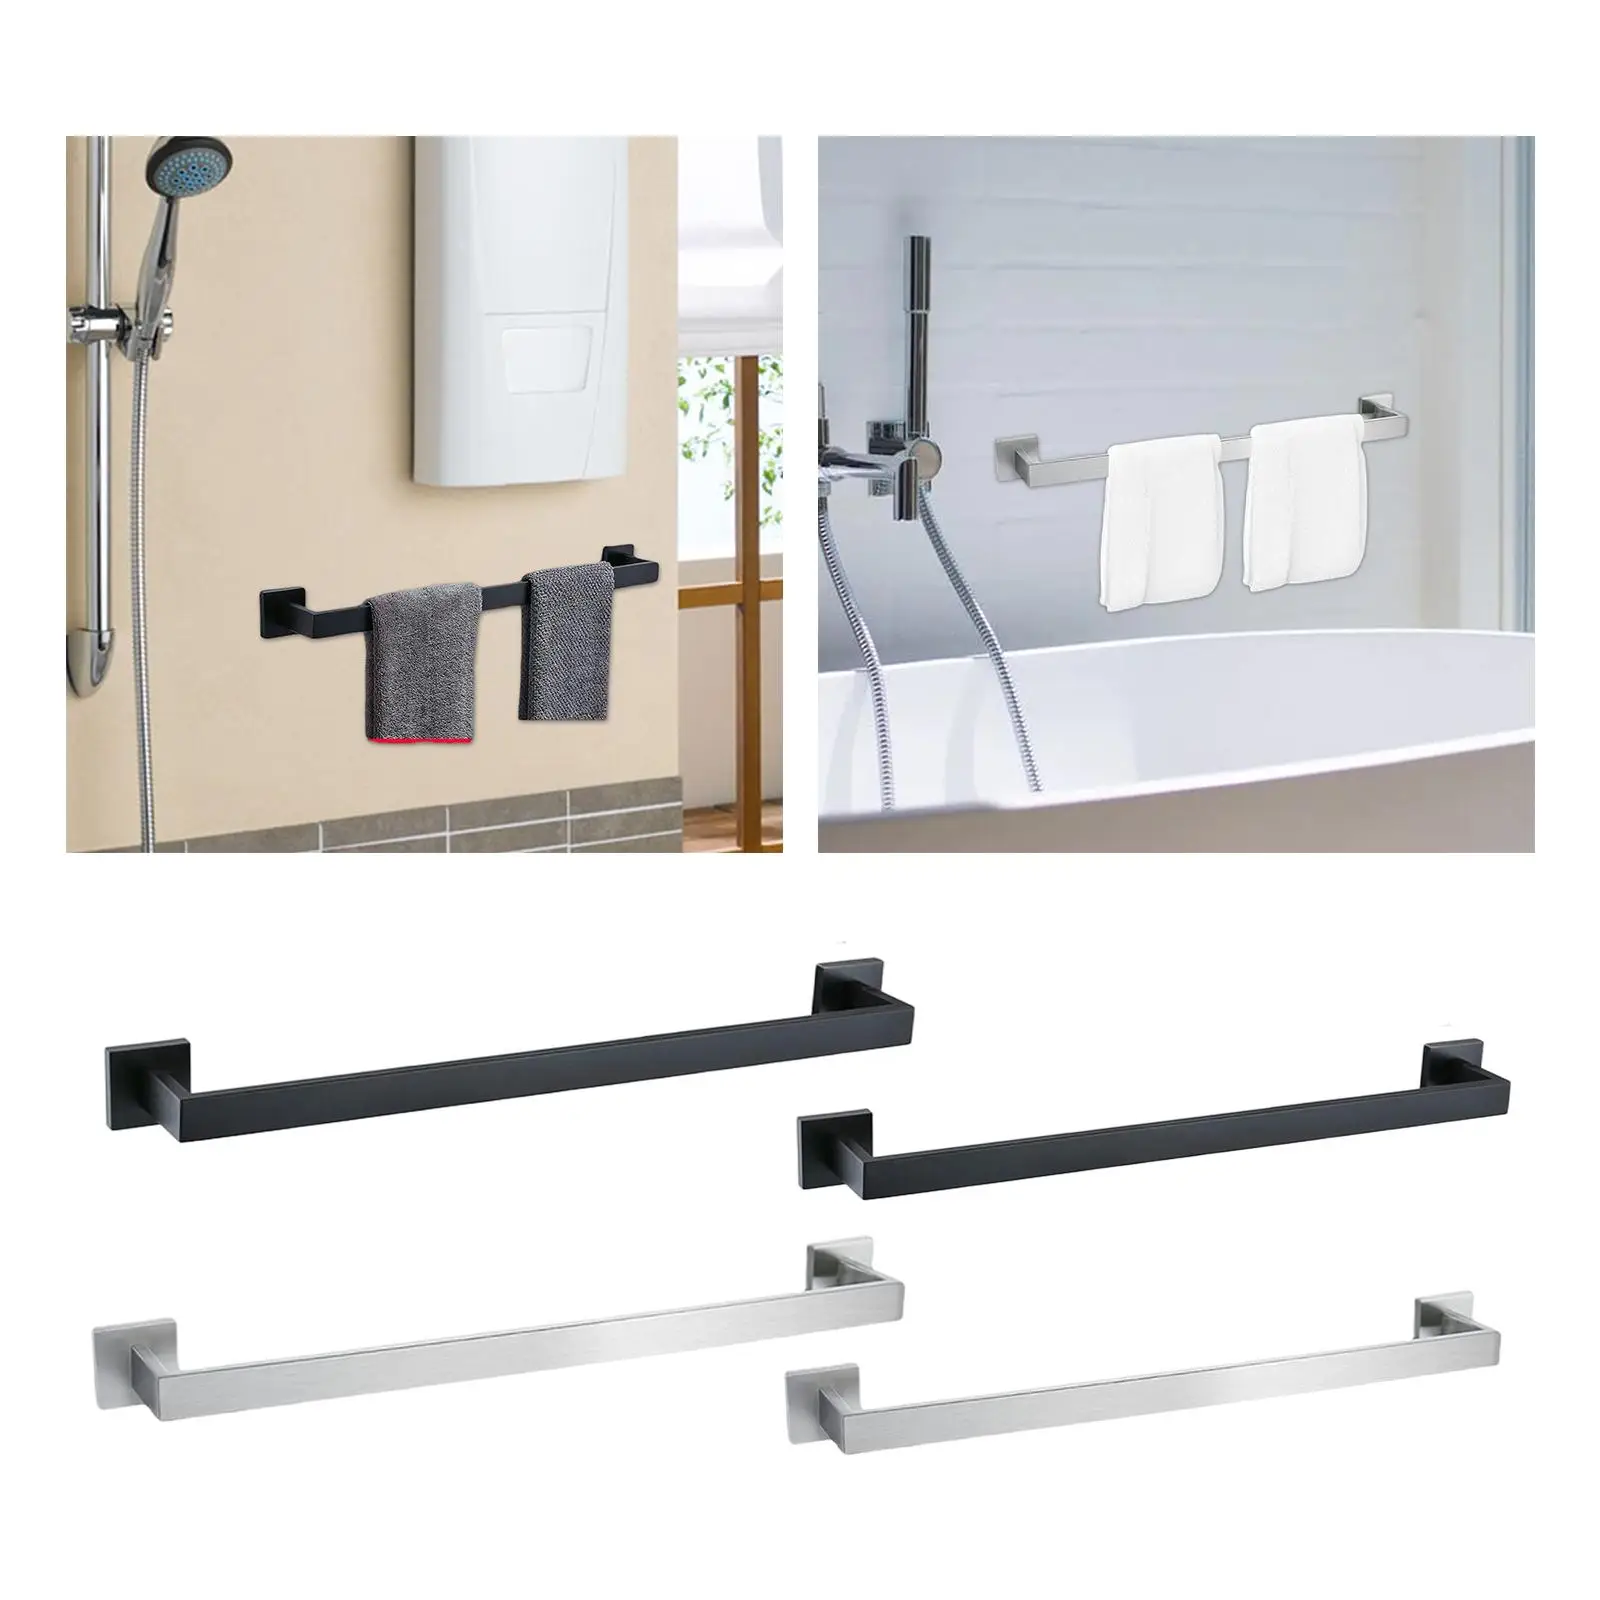 Durable Towel Rack Holder Space Saving Stand Wall Mounted Rustproof Organizer for Bathroom Hotel Kitchen Hanging Robe Shower